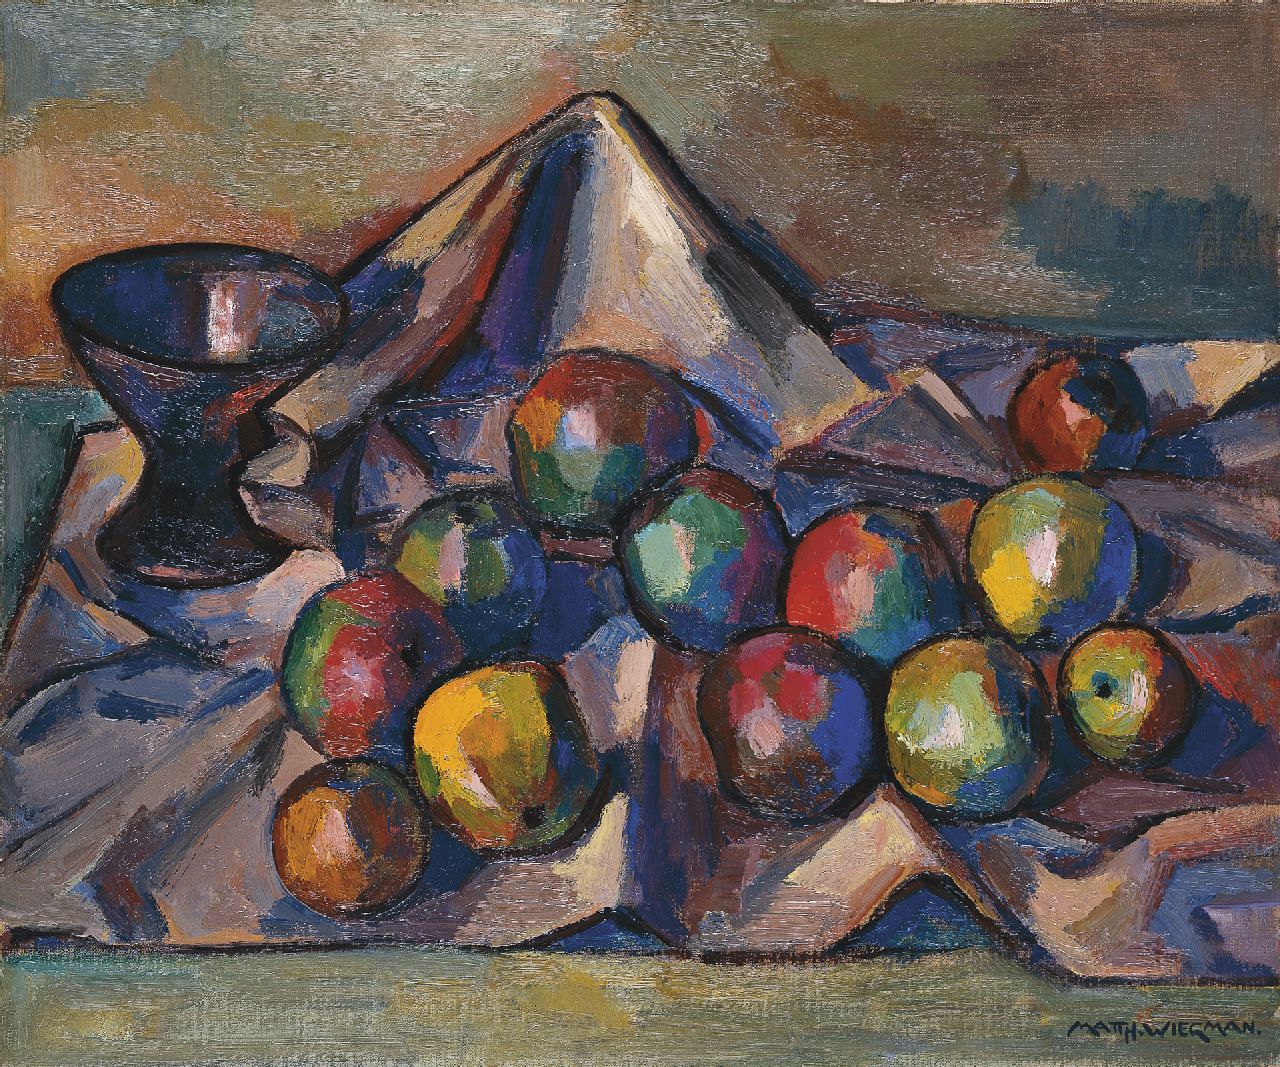 Wiegman M.J.M.  | Mattheus Johannes Marie 'Matthieu' Wiegman, Still life with apples, oil on canvas laid down on panel 54.2 x 65.2 cm, signed l.r. and dated verso 1956